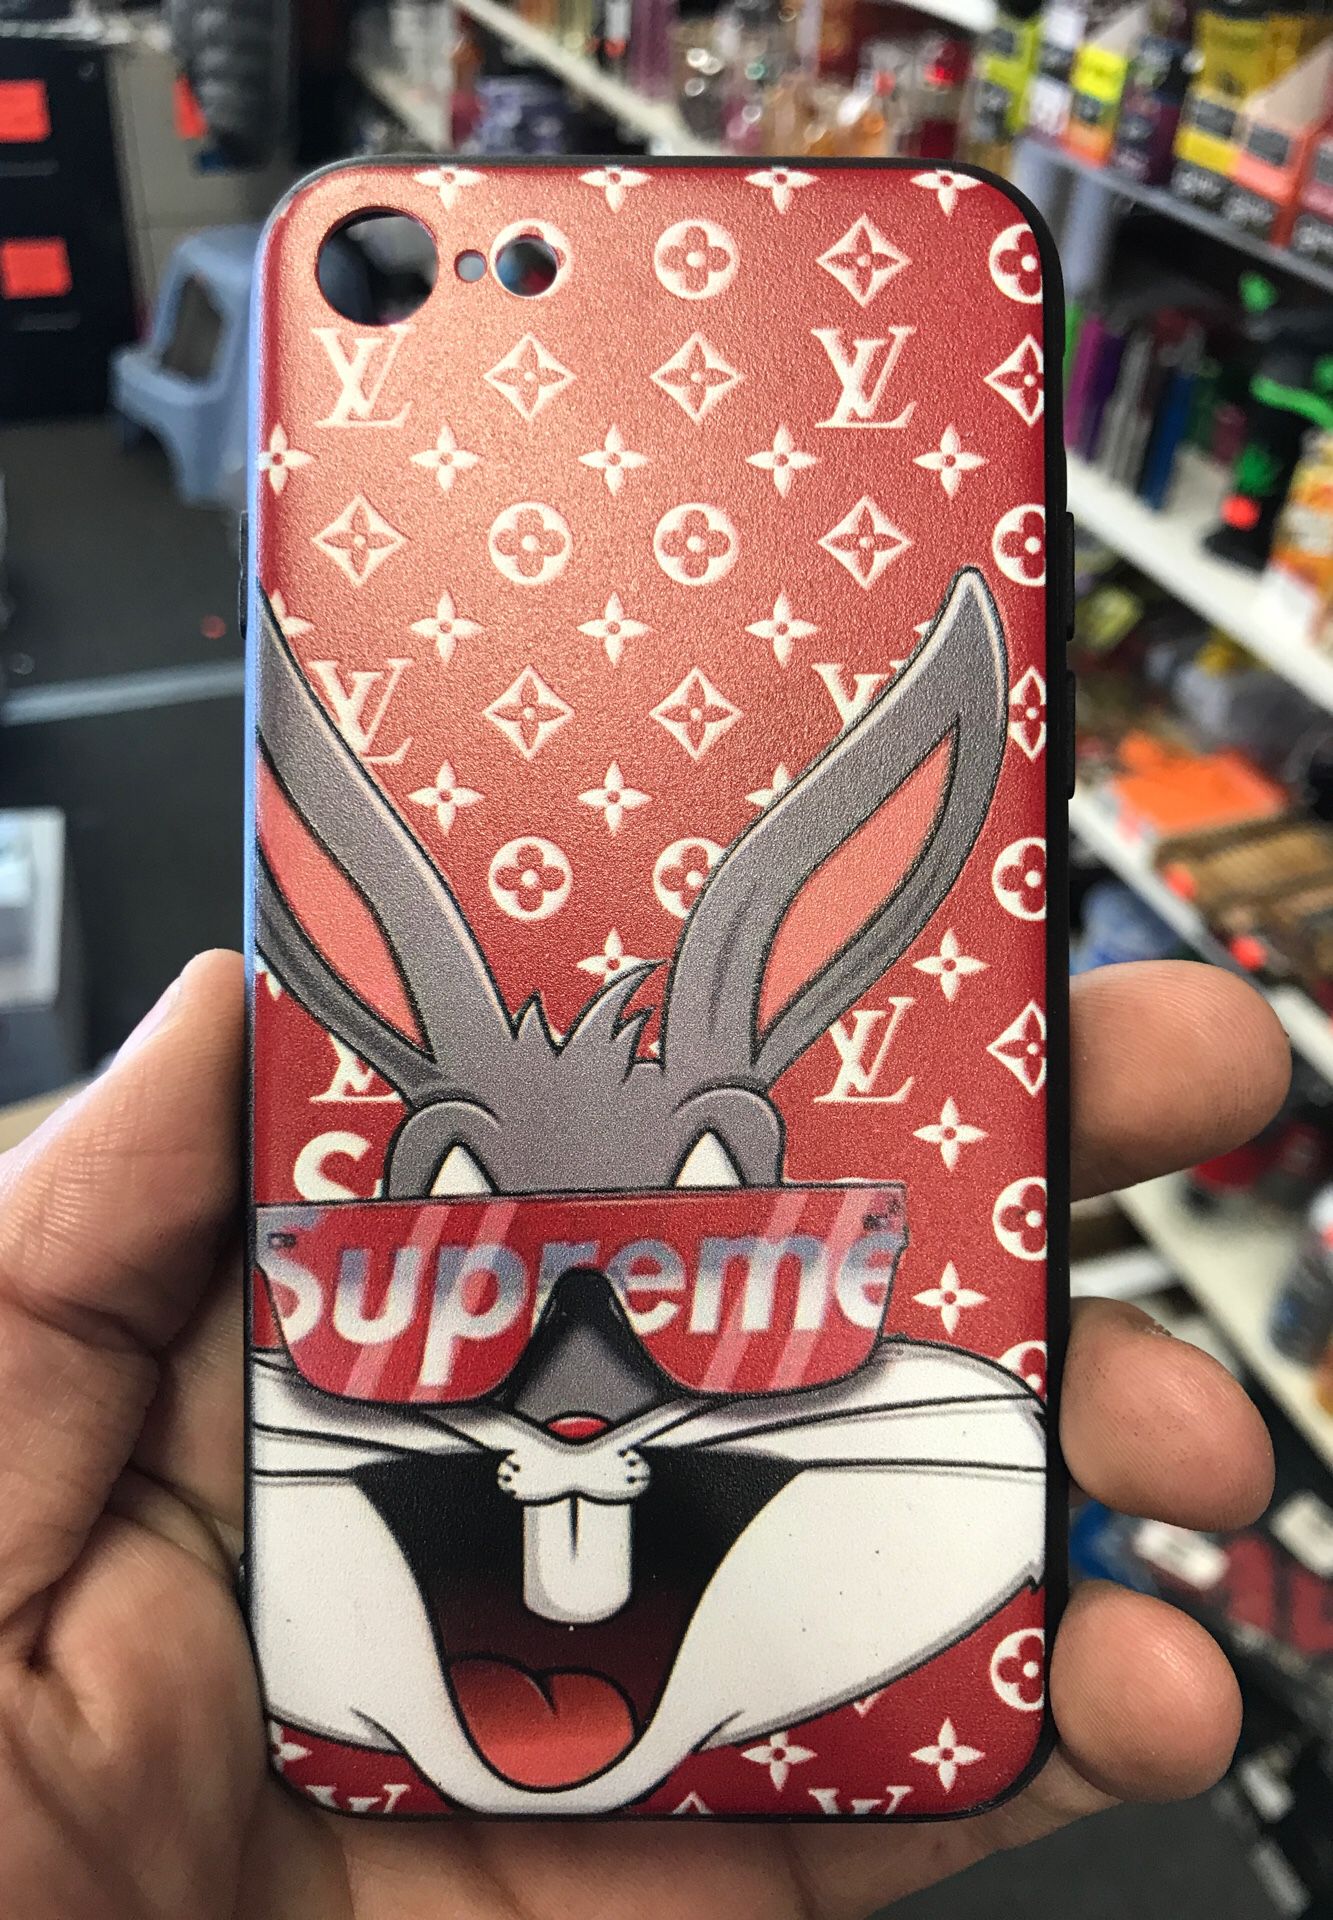 Supreme LV BUGS BUNNY iPhone 6 case for Sale in Chicago, IL - OfferUp